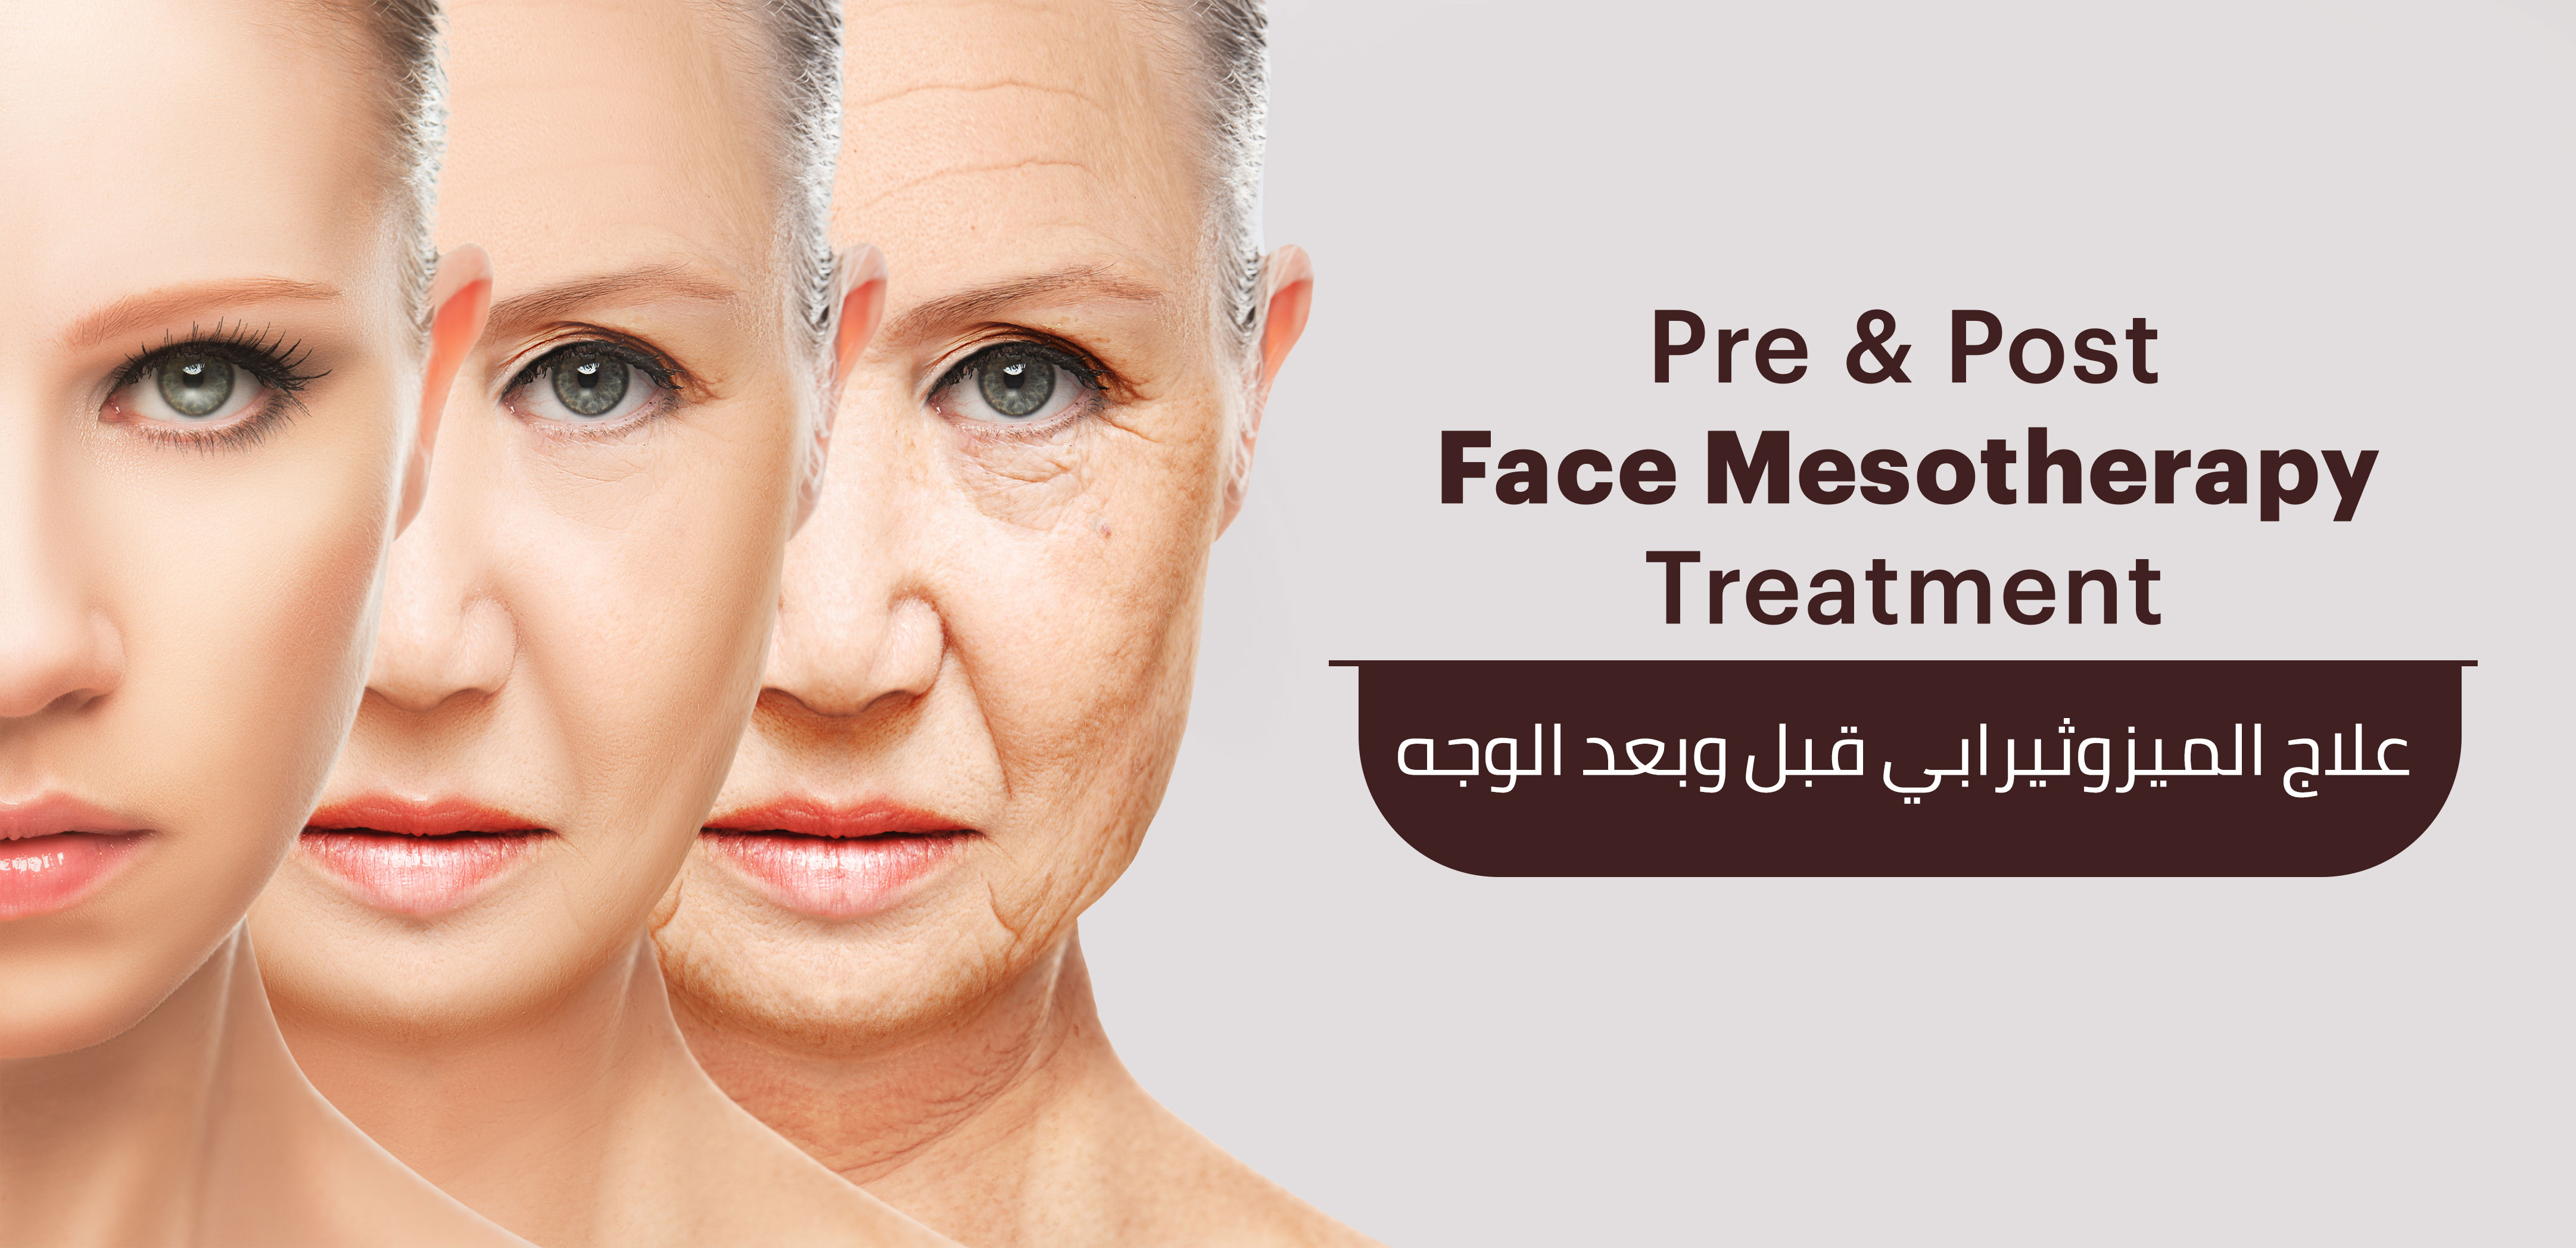 PRE & POST FACE & HAIR MESOTHERAPY TREATMENT